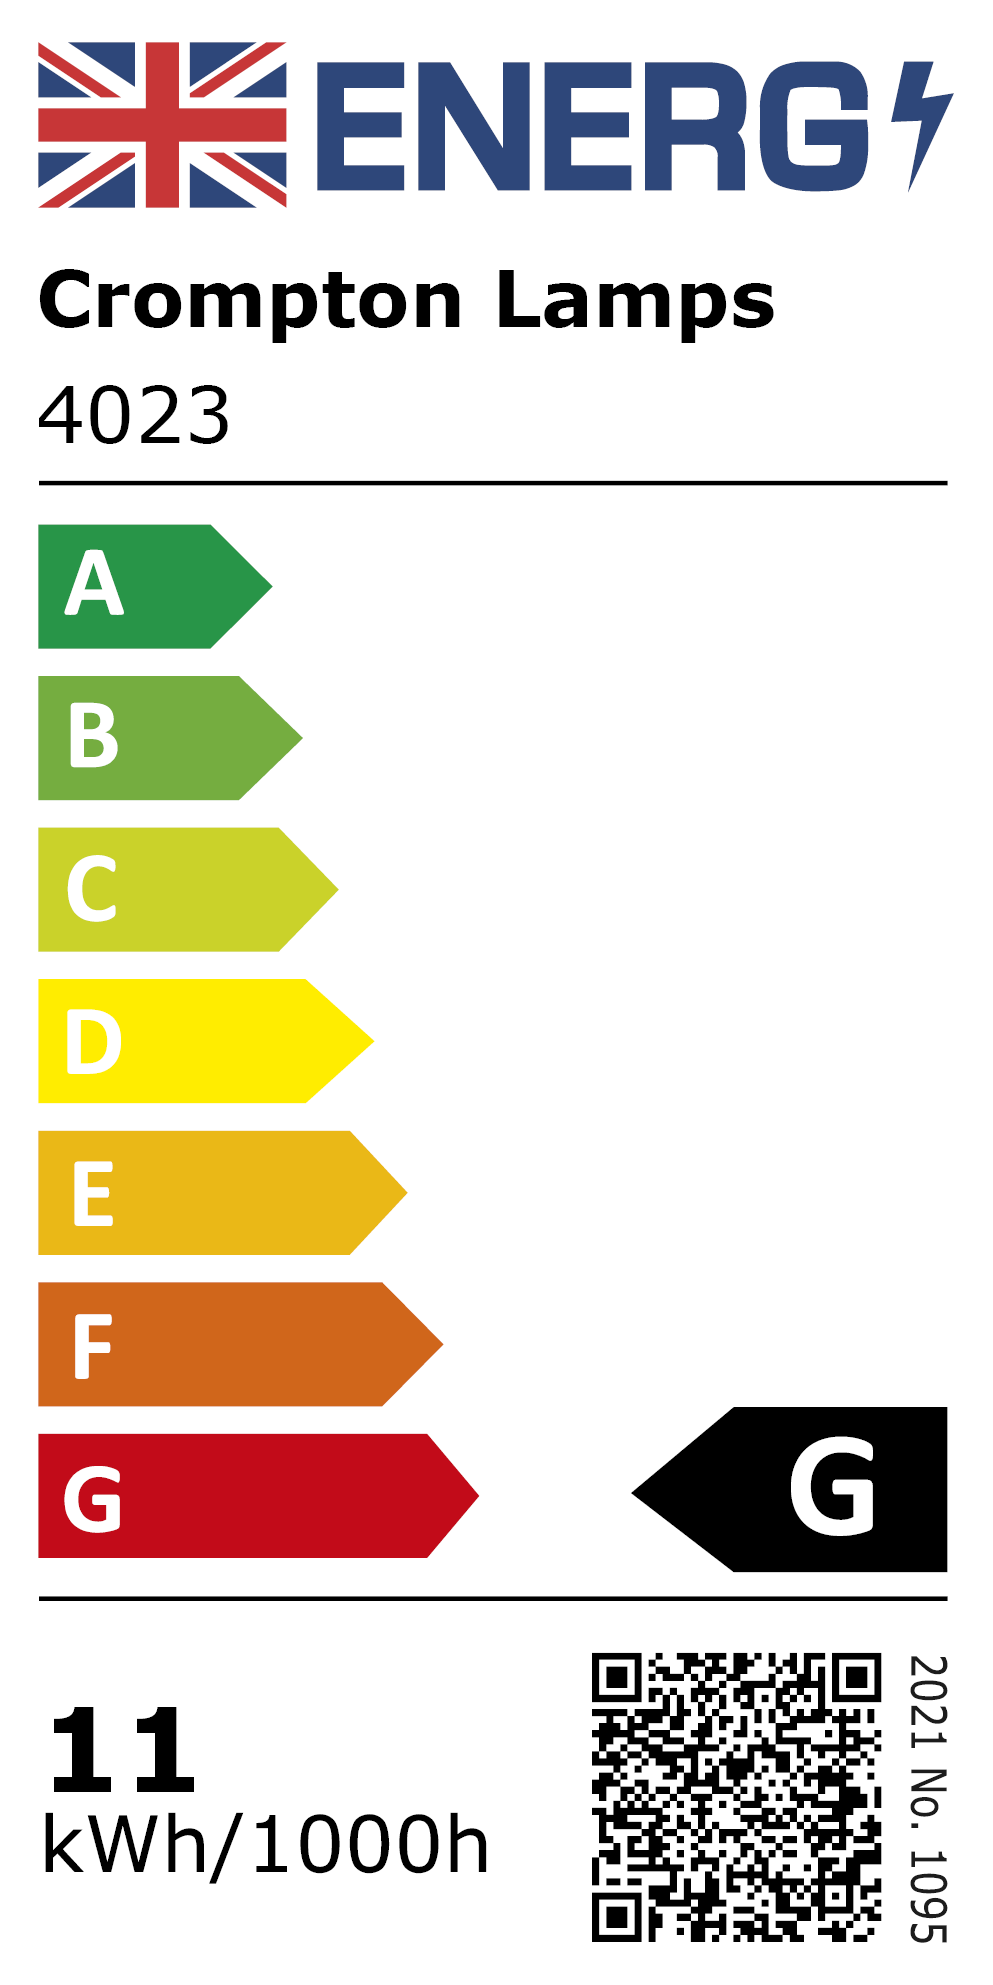 New 2021 Energy Rating Label: MPN 4023